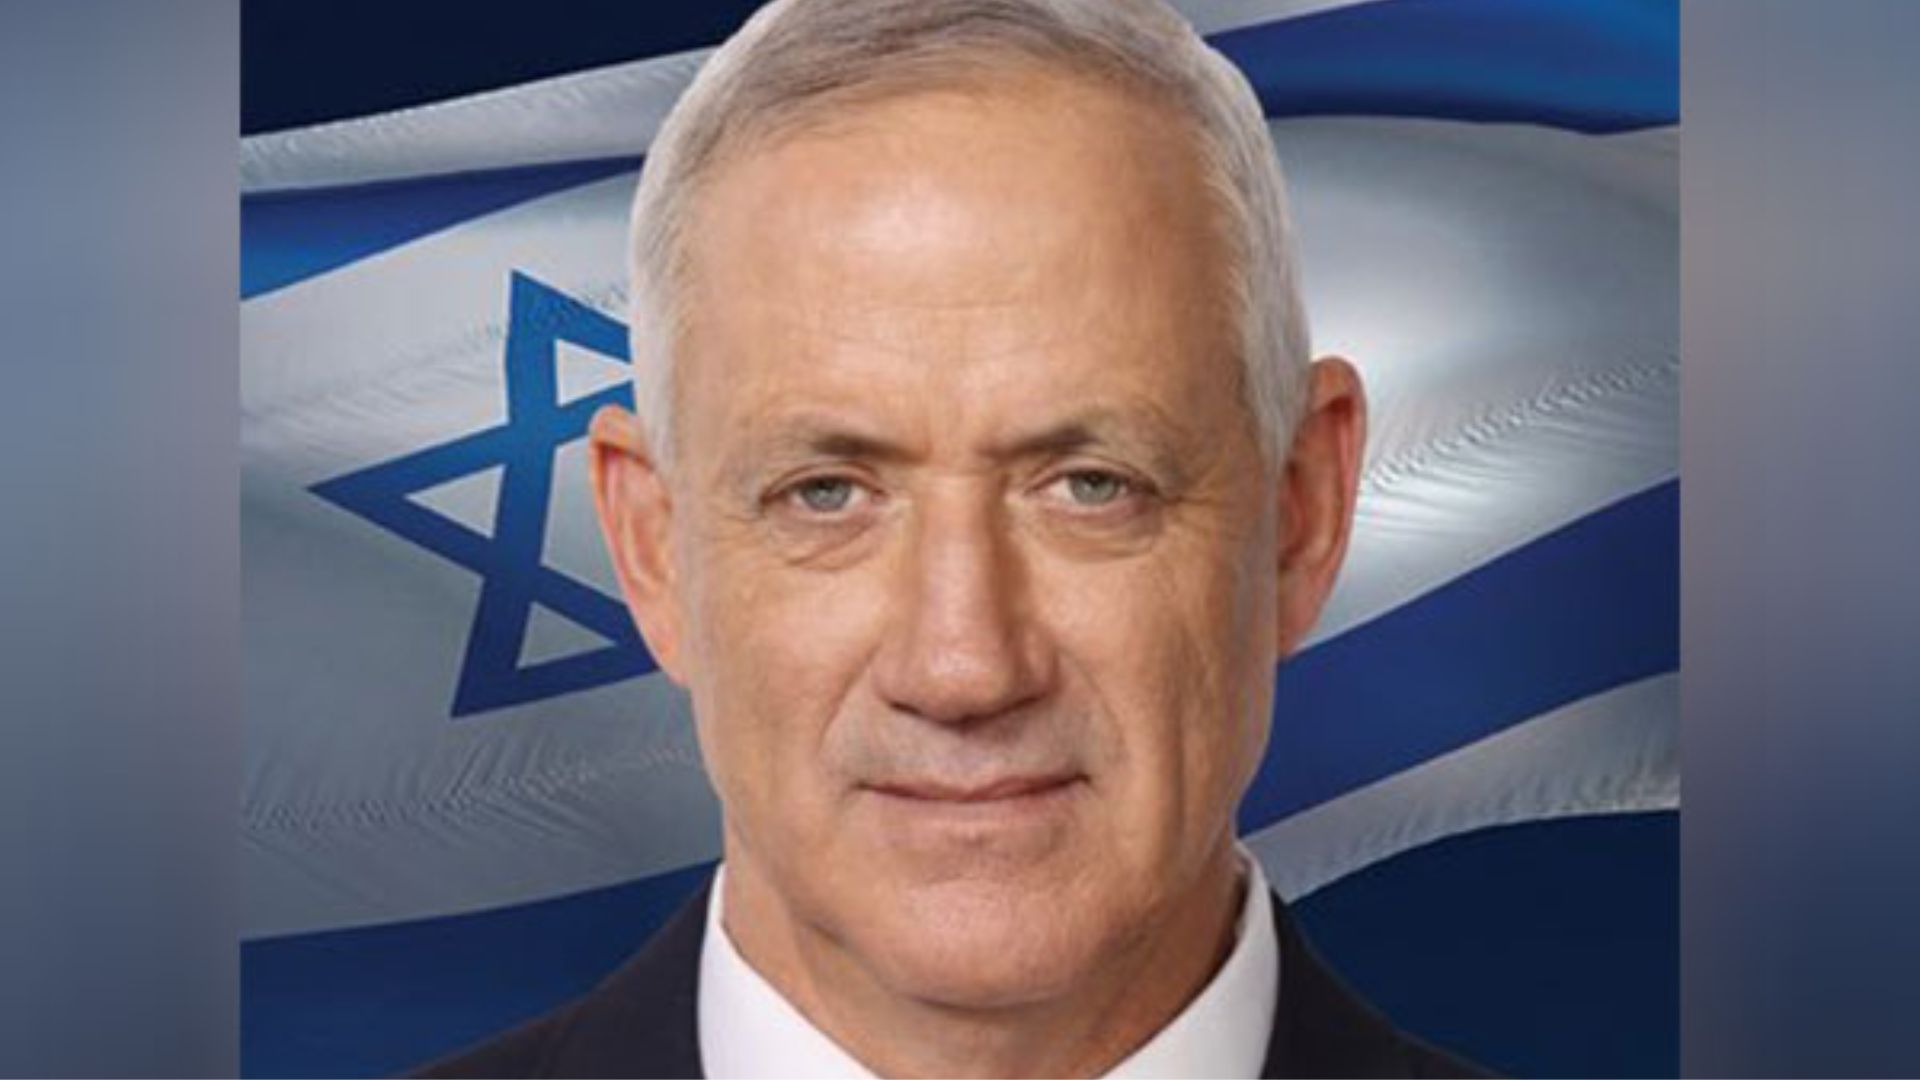 Israeli Minister Benny Gantz Resigns from Netanyahu’s War Cabinet Amid Ongoing Conflict